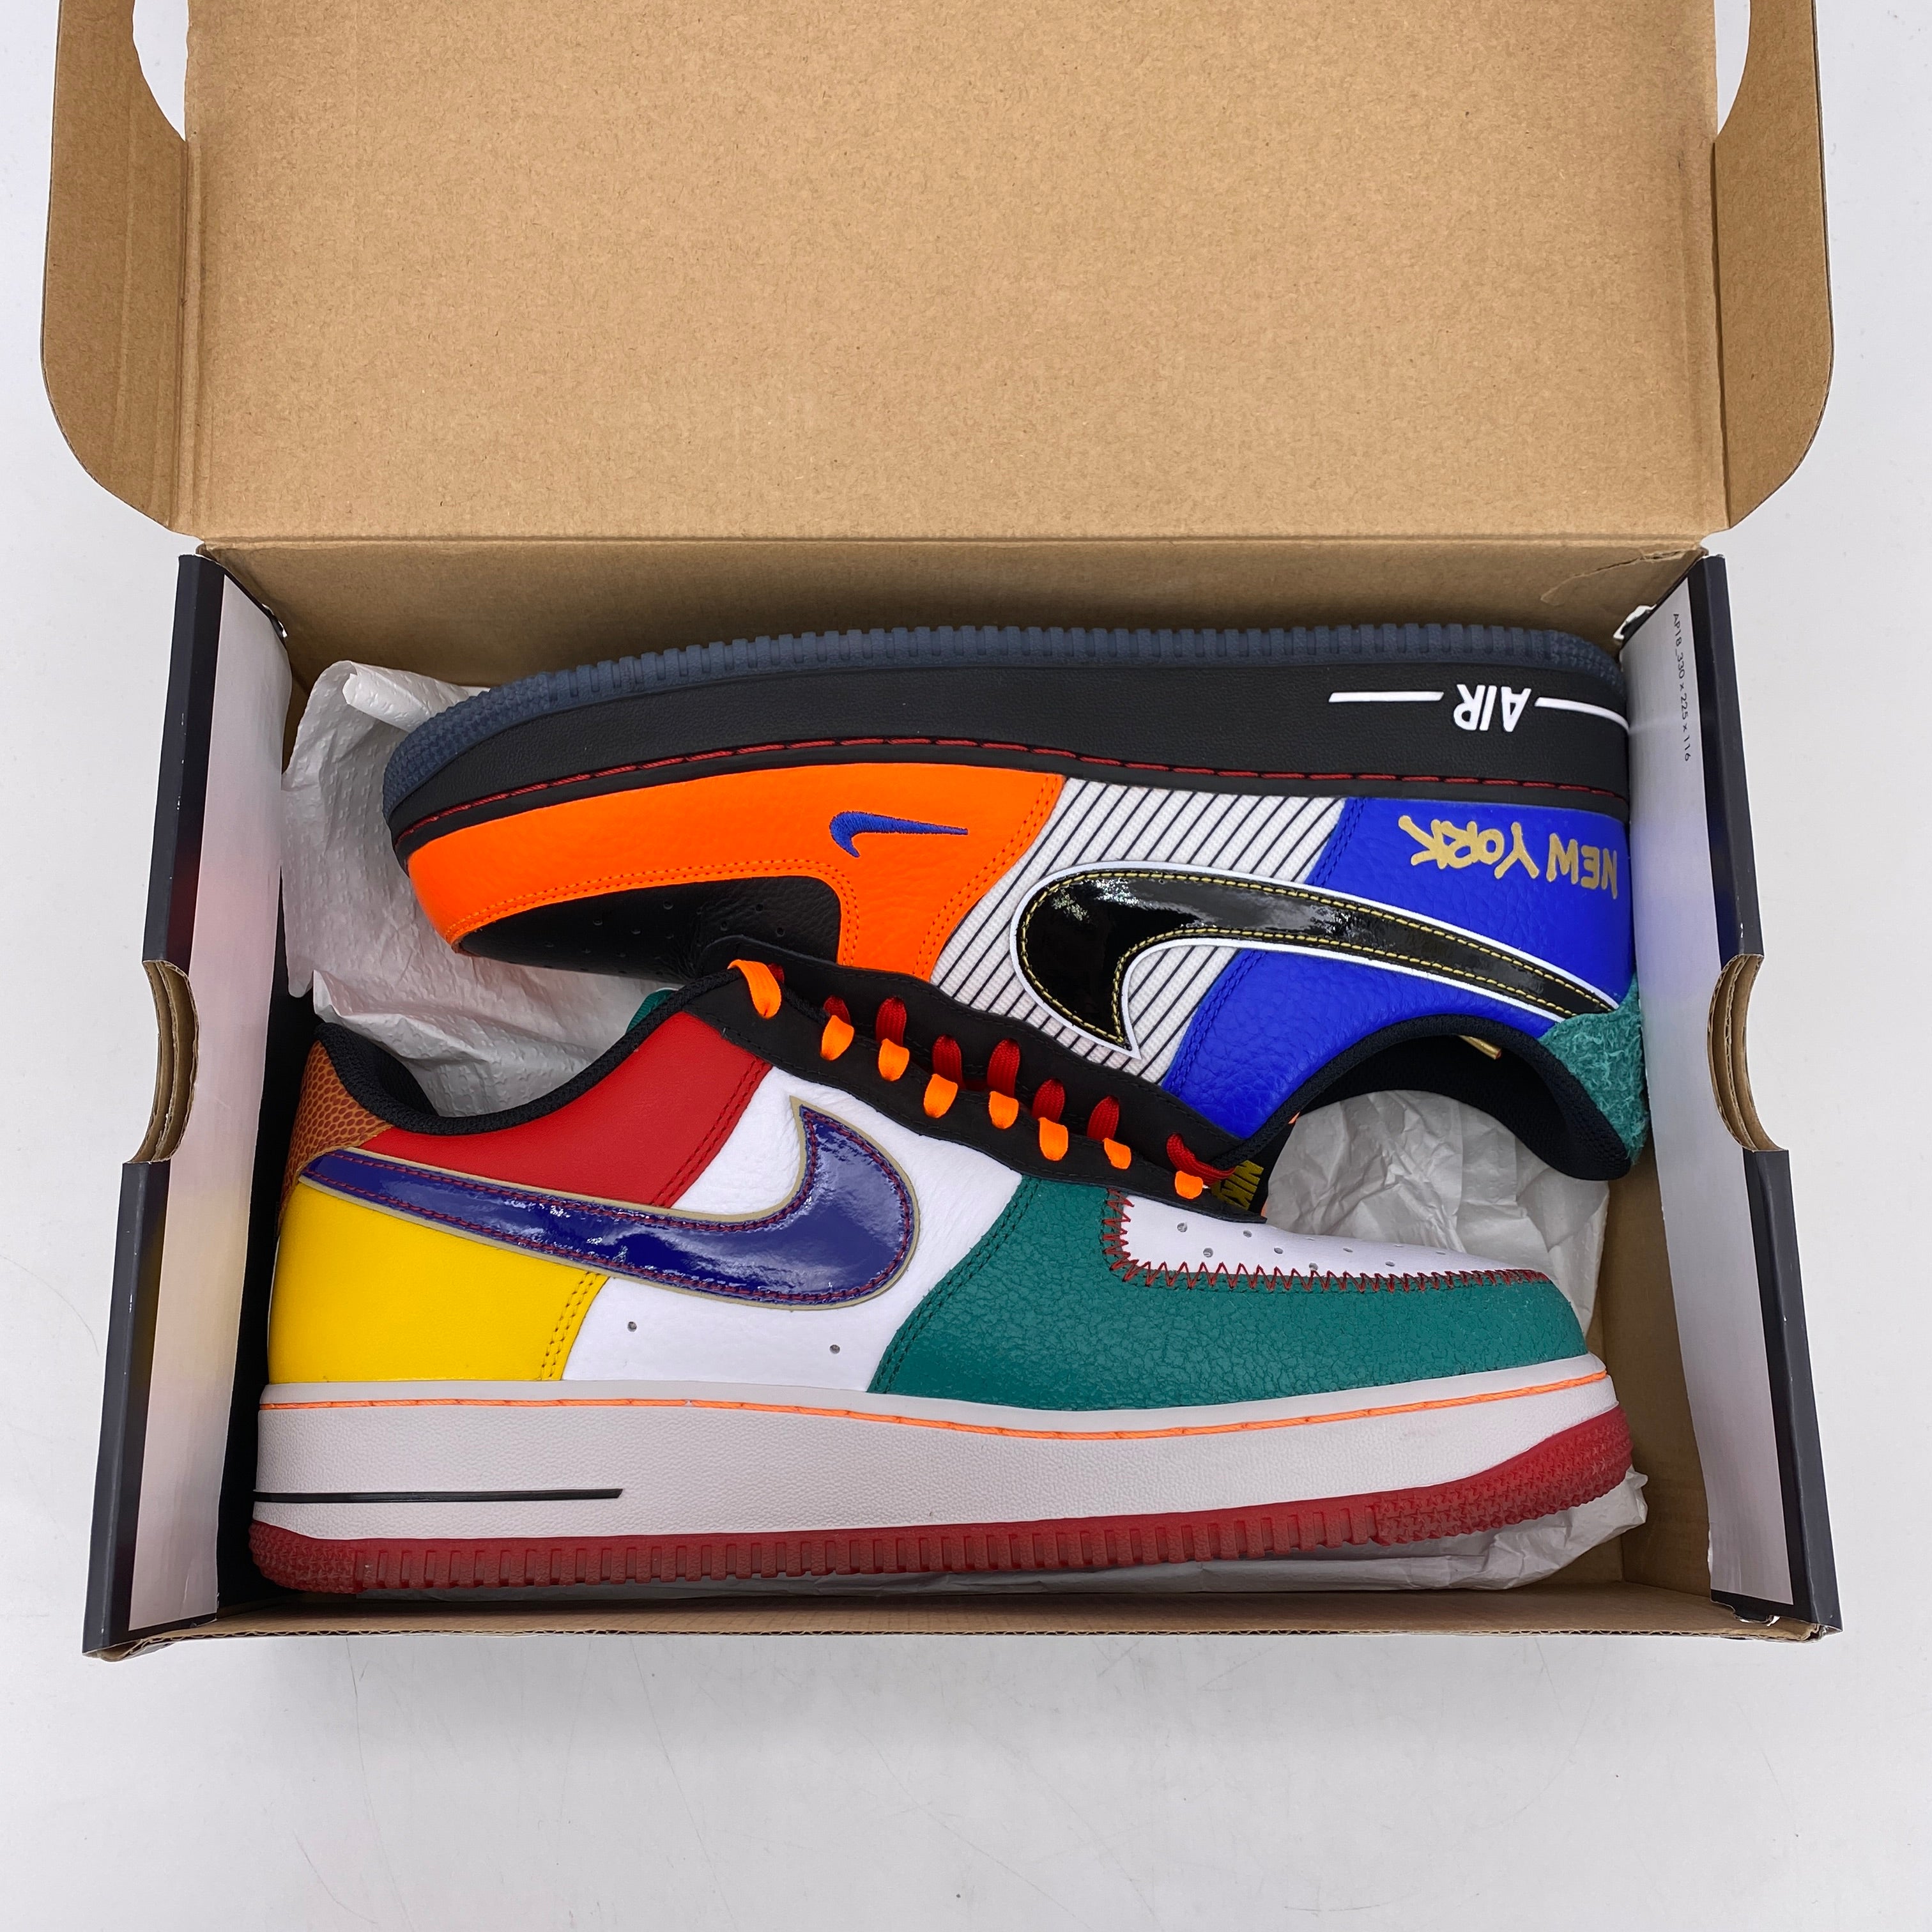 Nike Air Force 1 '07 "Nyc City Of Athletes" 2019 New Size 10.5